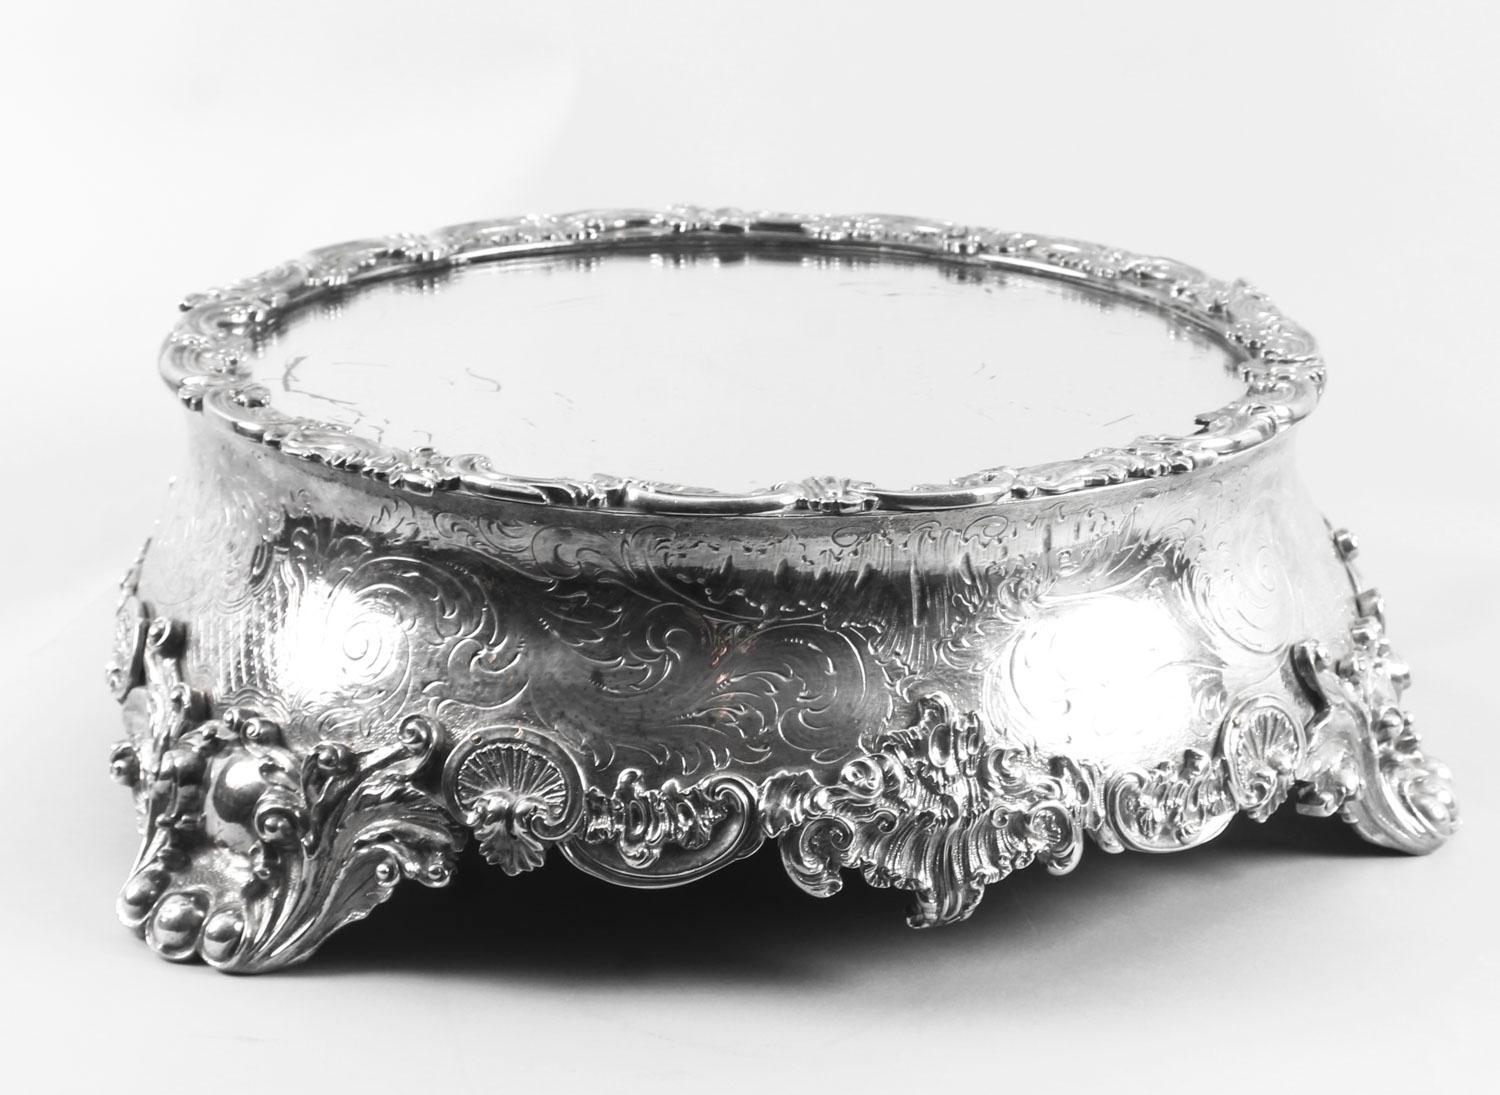 Victorian Antique English Silver Plated Mirrored Top Cake Stand, 19th Century